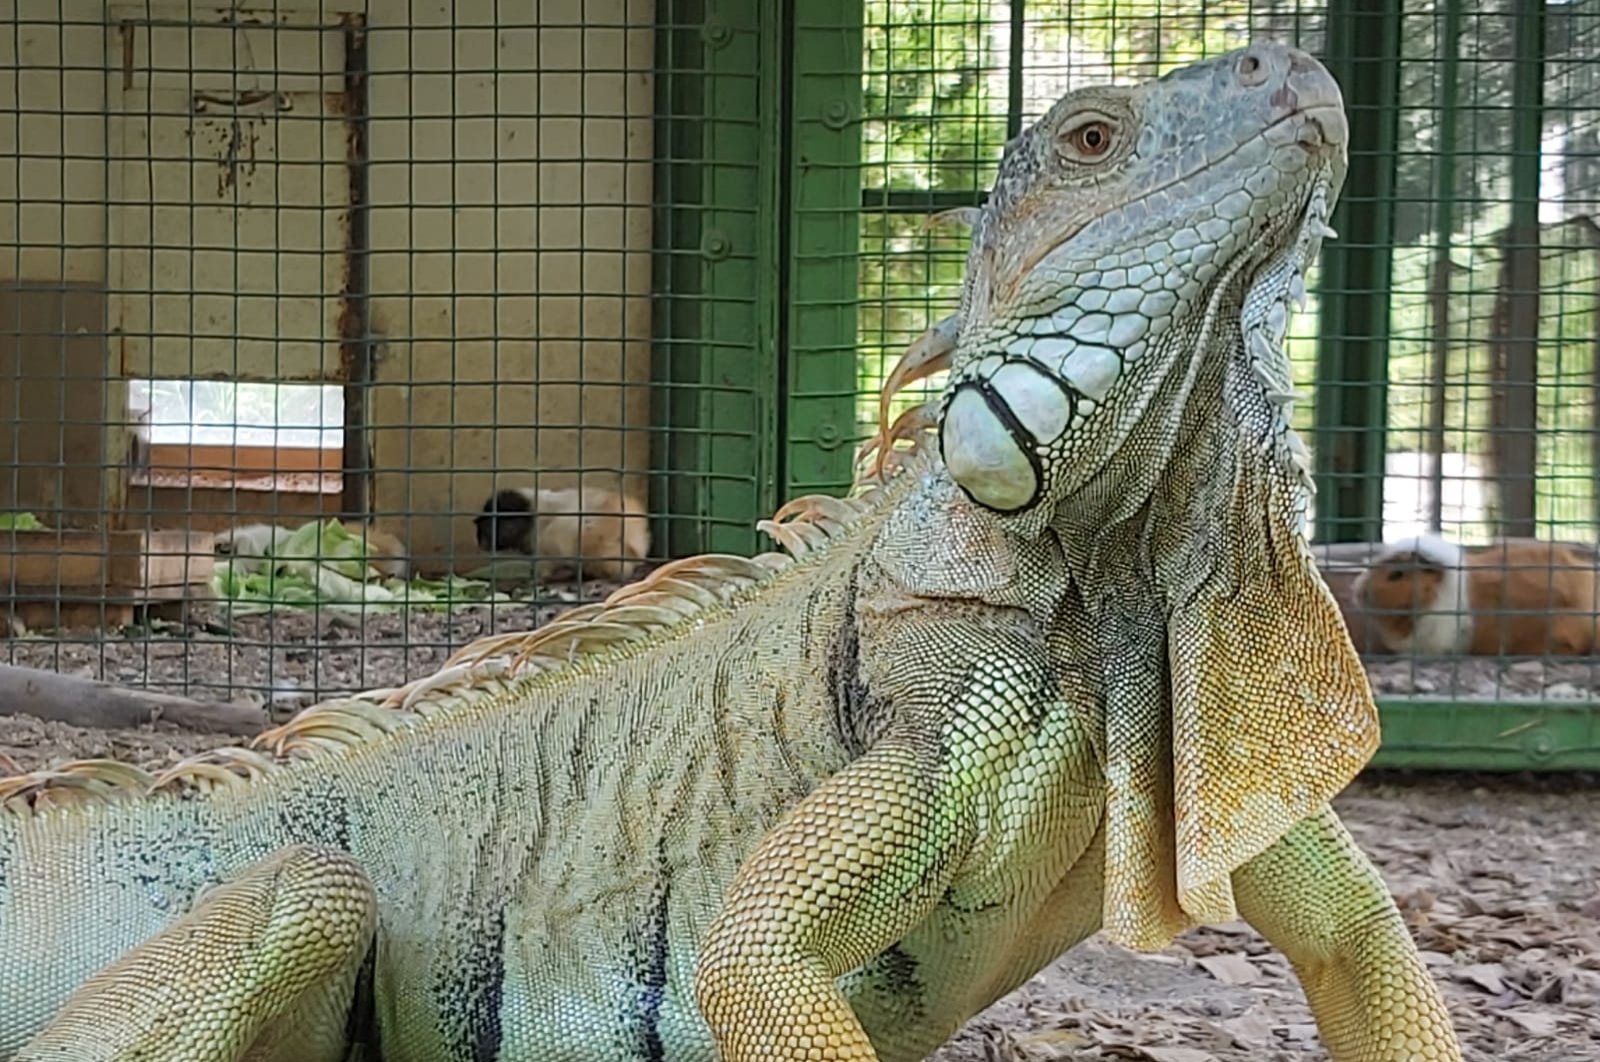 A newly arrived iguana is seen at the Tarsus Animal Park in the southern city of Mersin, Turkey, Sept. 8, 2020. (Mersin Metropolitan Municipality via AA)